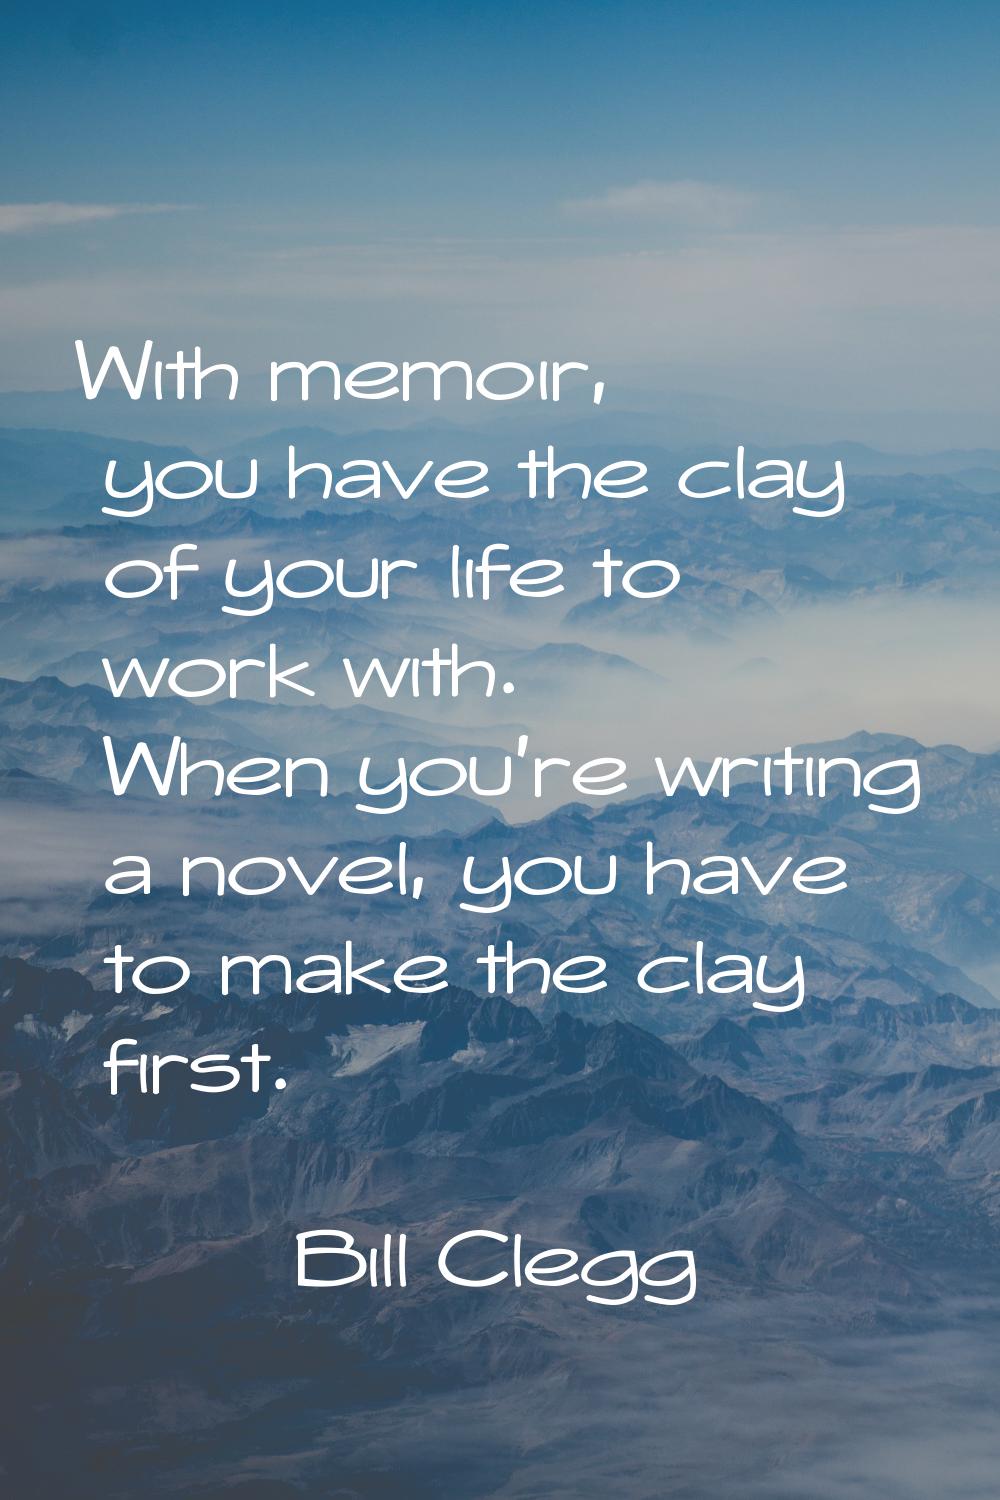 With memoir, you have the clay of your life to work with. When you're writing a novel, you have to 